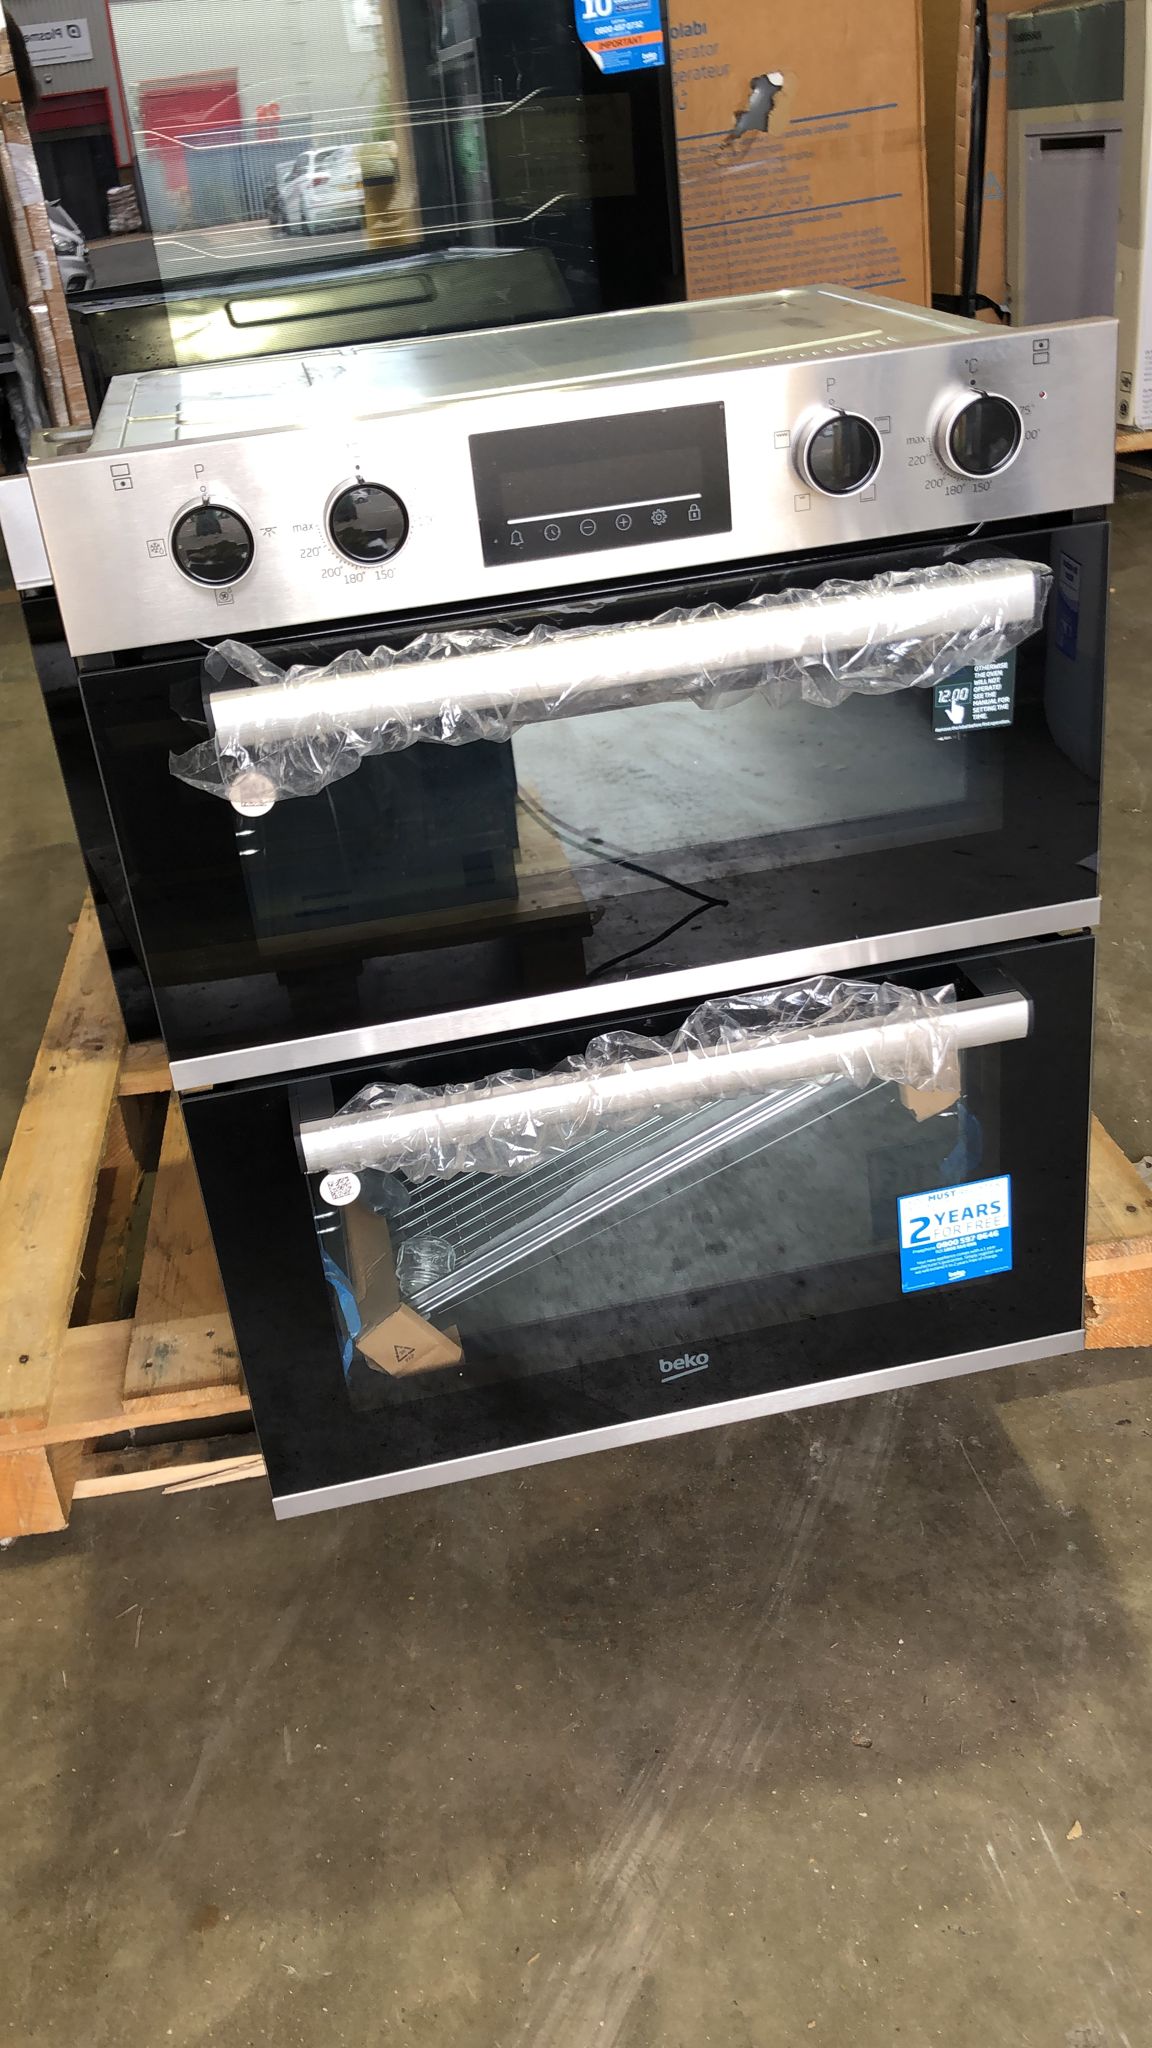 Beko BBTQF22300X Stainless Steel Built-in Double Oven X Display -7731